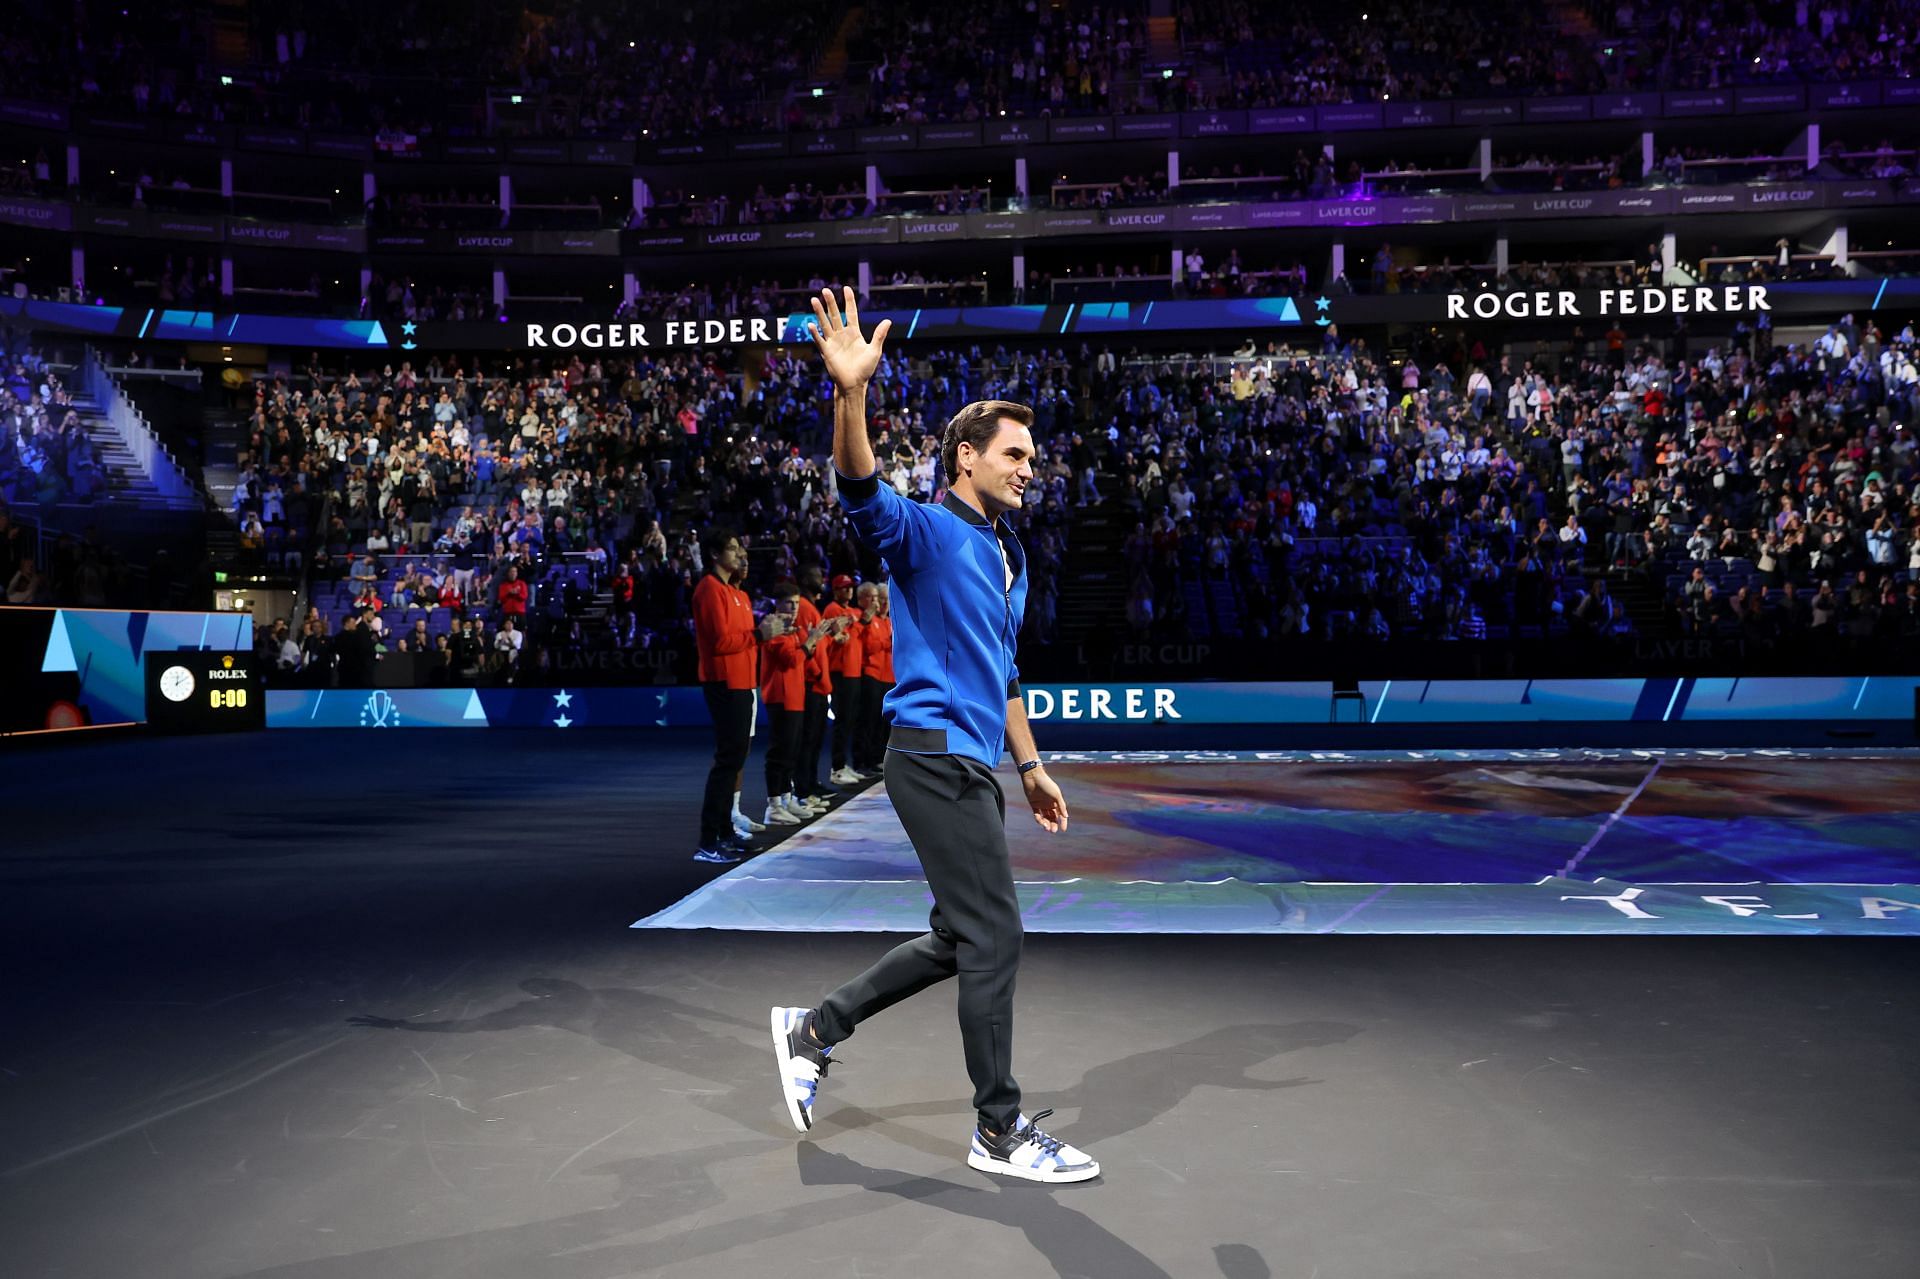 Roger Federer at the 2022 Laver Cup in London.